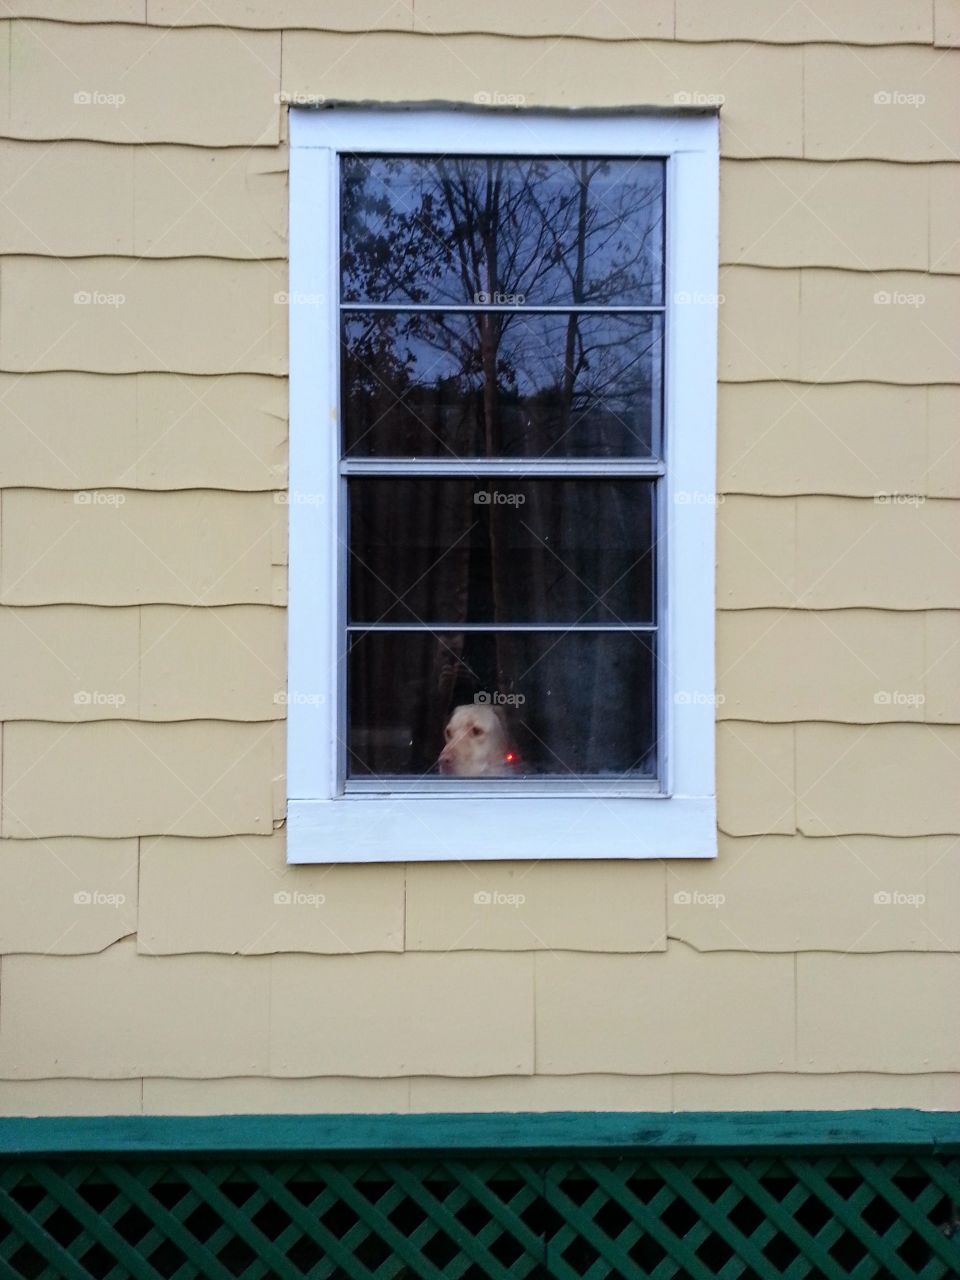 That moment you feel someone is watching. Garcia the big yeller dog looking out of the window of the yellow house.